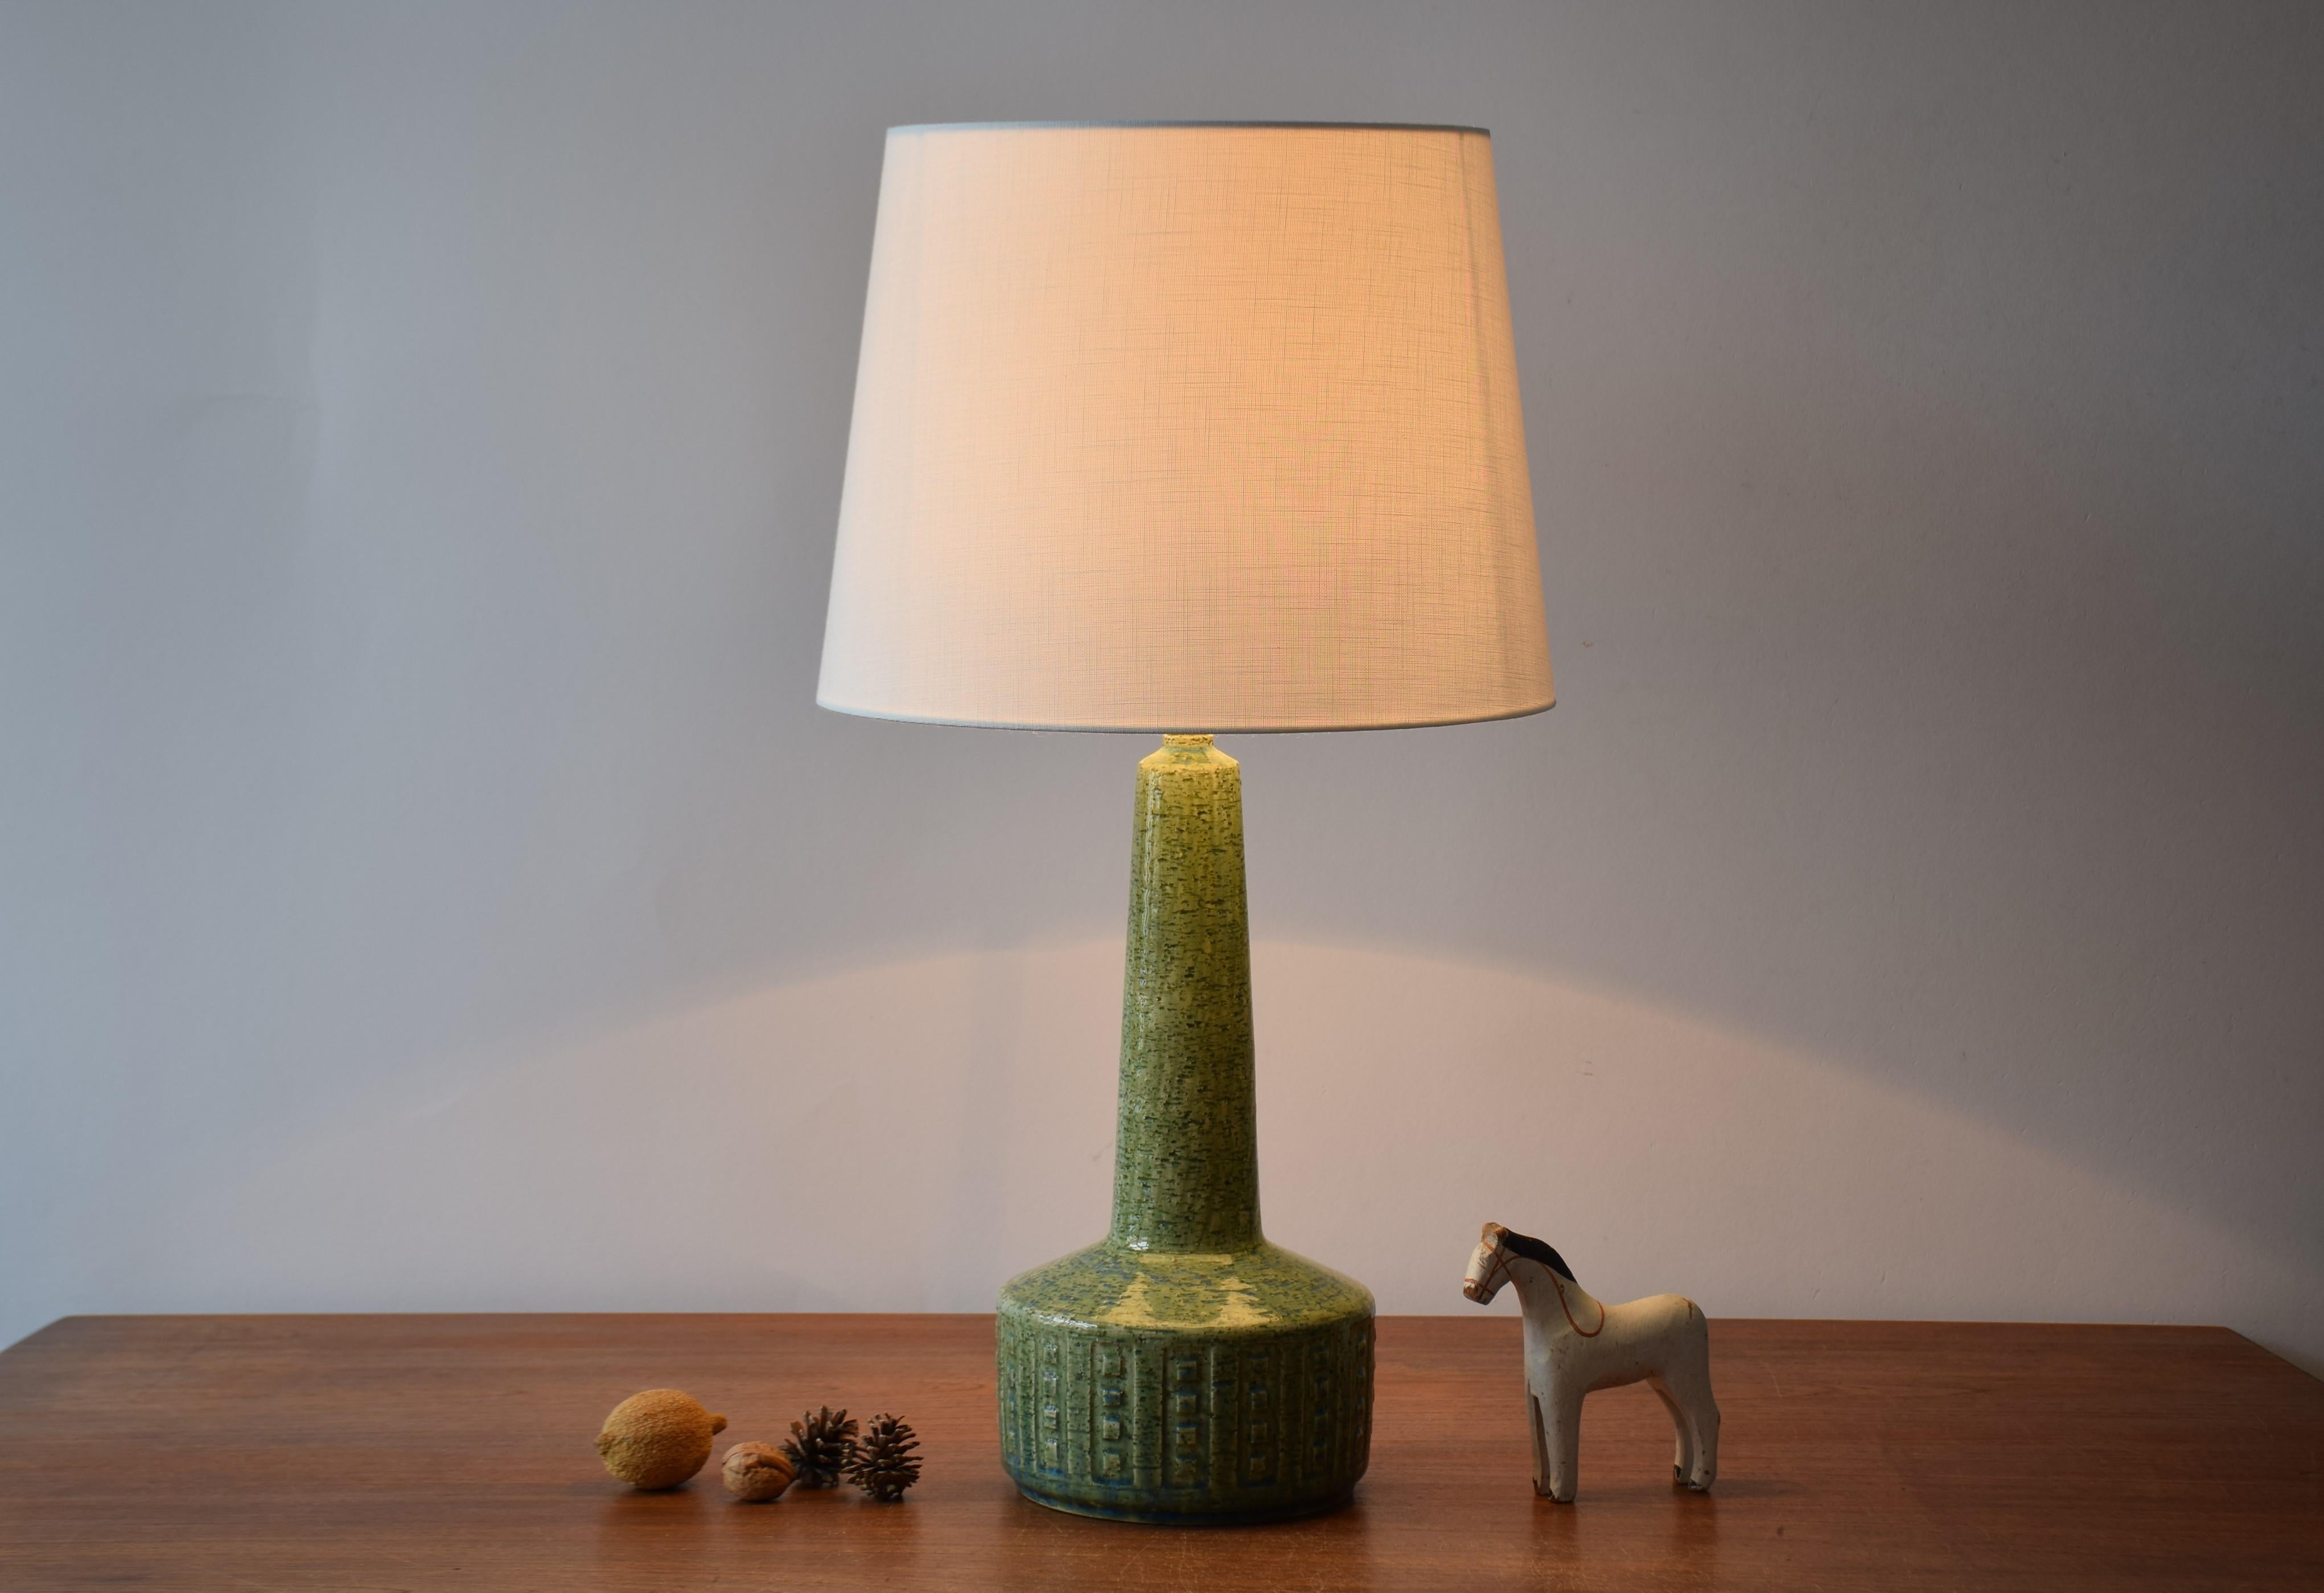 Midcentury tall table lamp from Danish Palshus.
The lamp was designed by Per Linnemann-Schmidt and produced, circa 1960s.
It is made with chamotte clay which gives a rough and vivid surface. The glaze is green with blue elements.

Included is a new